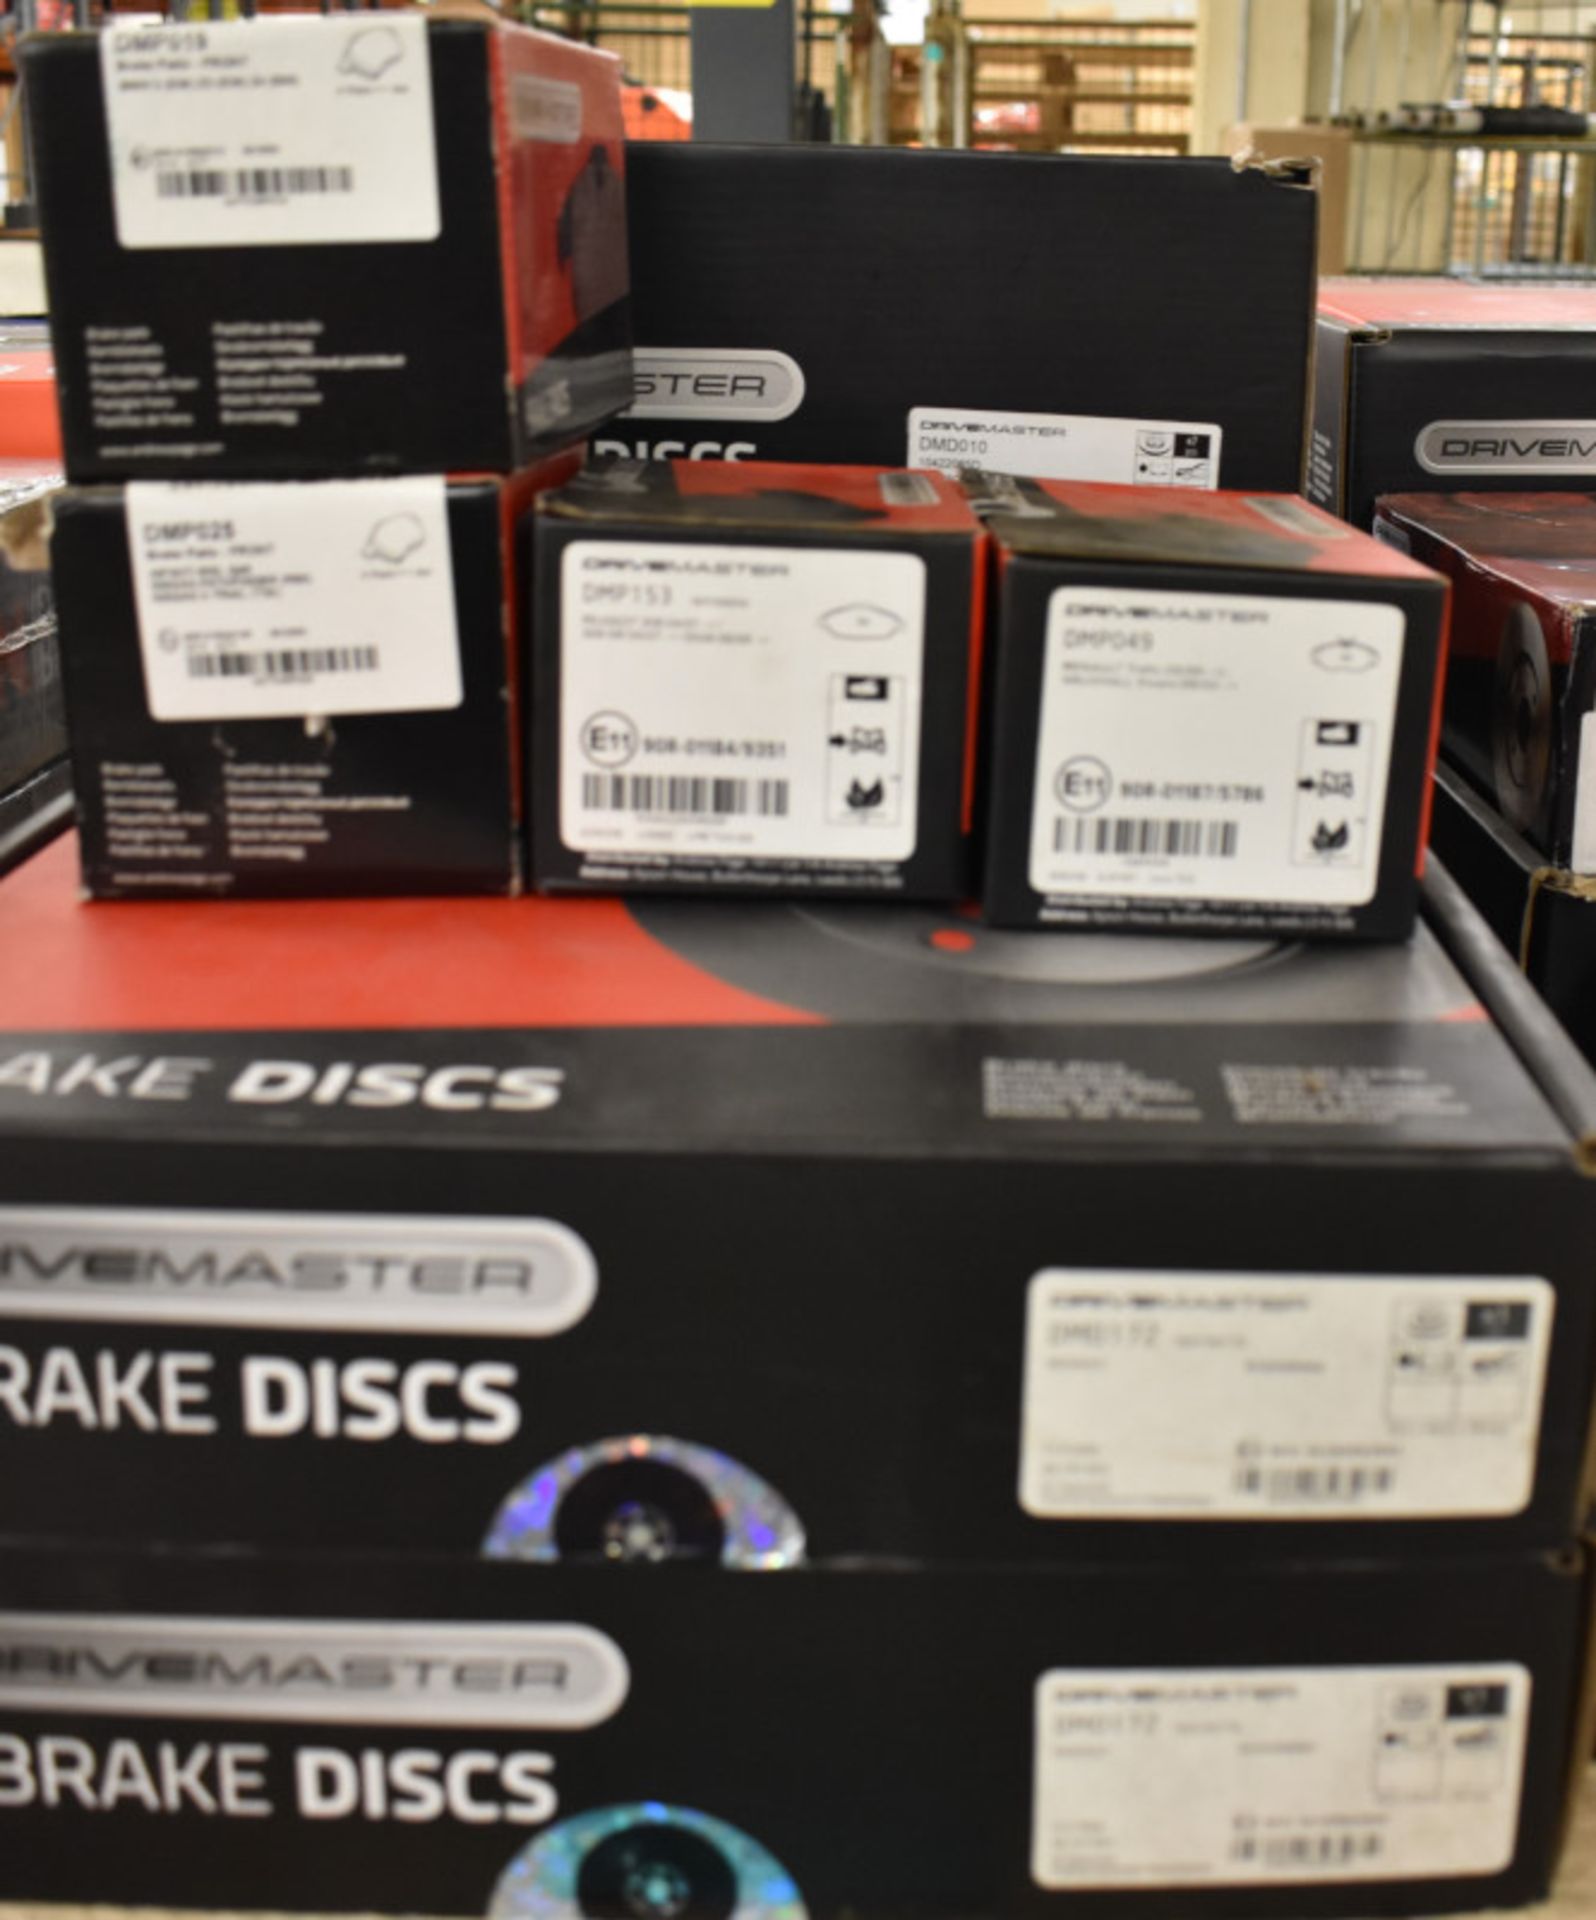 4x Drivemaster Brake Disc Sets & 4x Drivemaster Brake Pad Sets - please see pictures for examples - Image 2 of 5